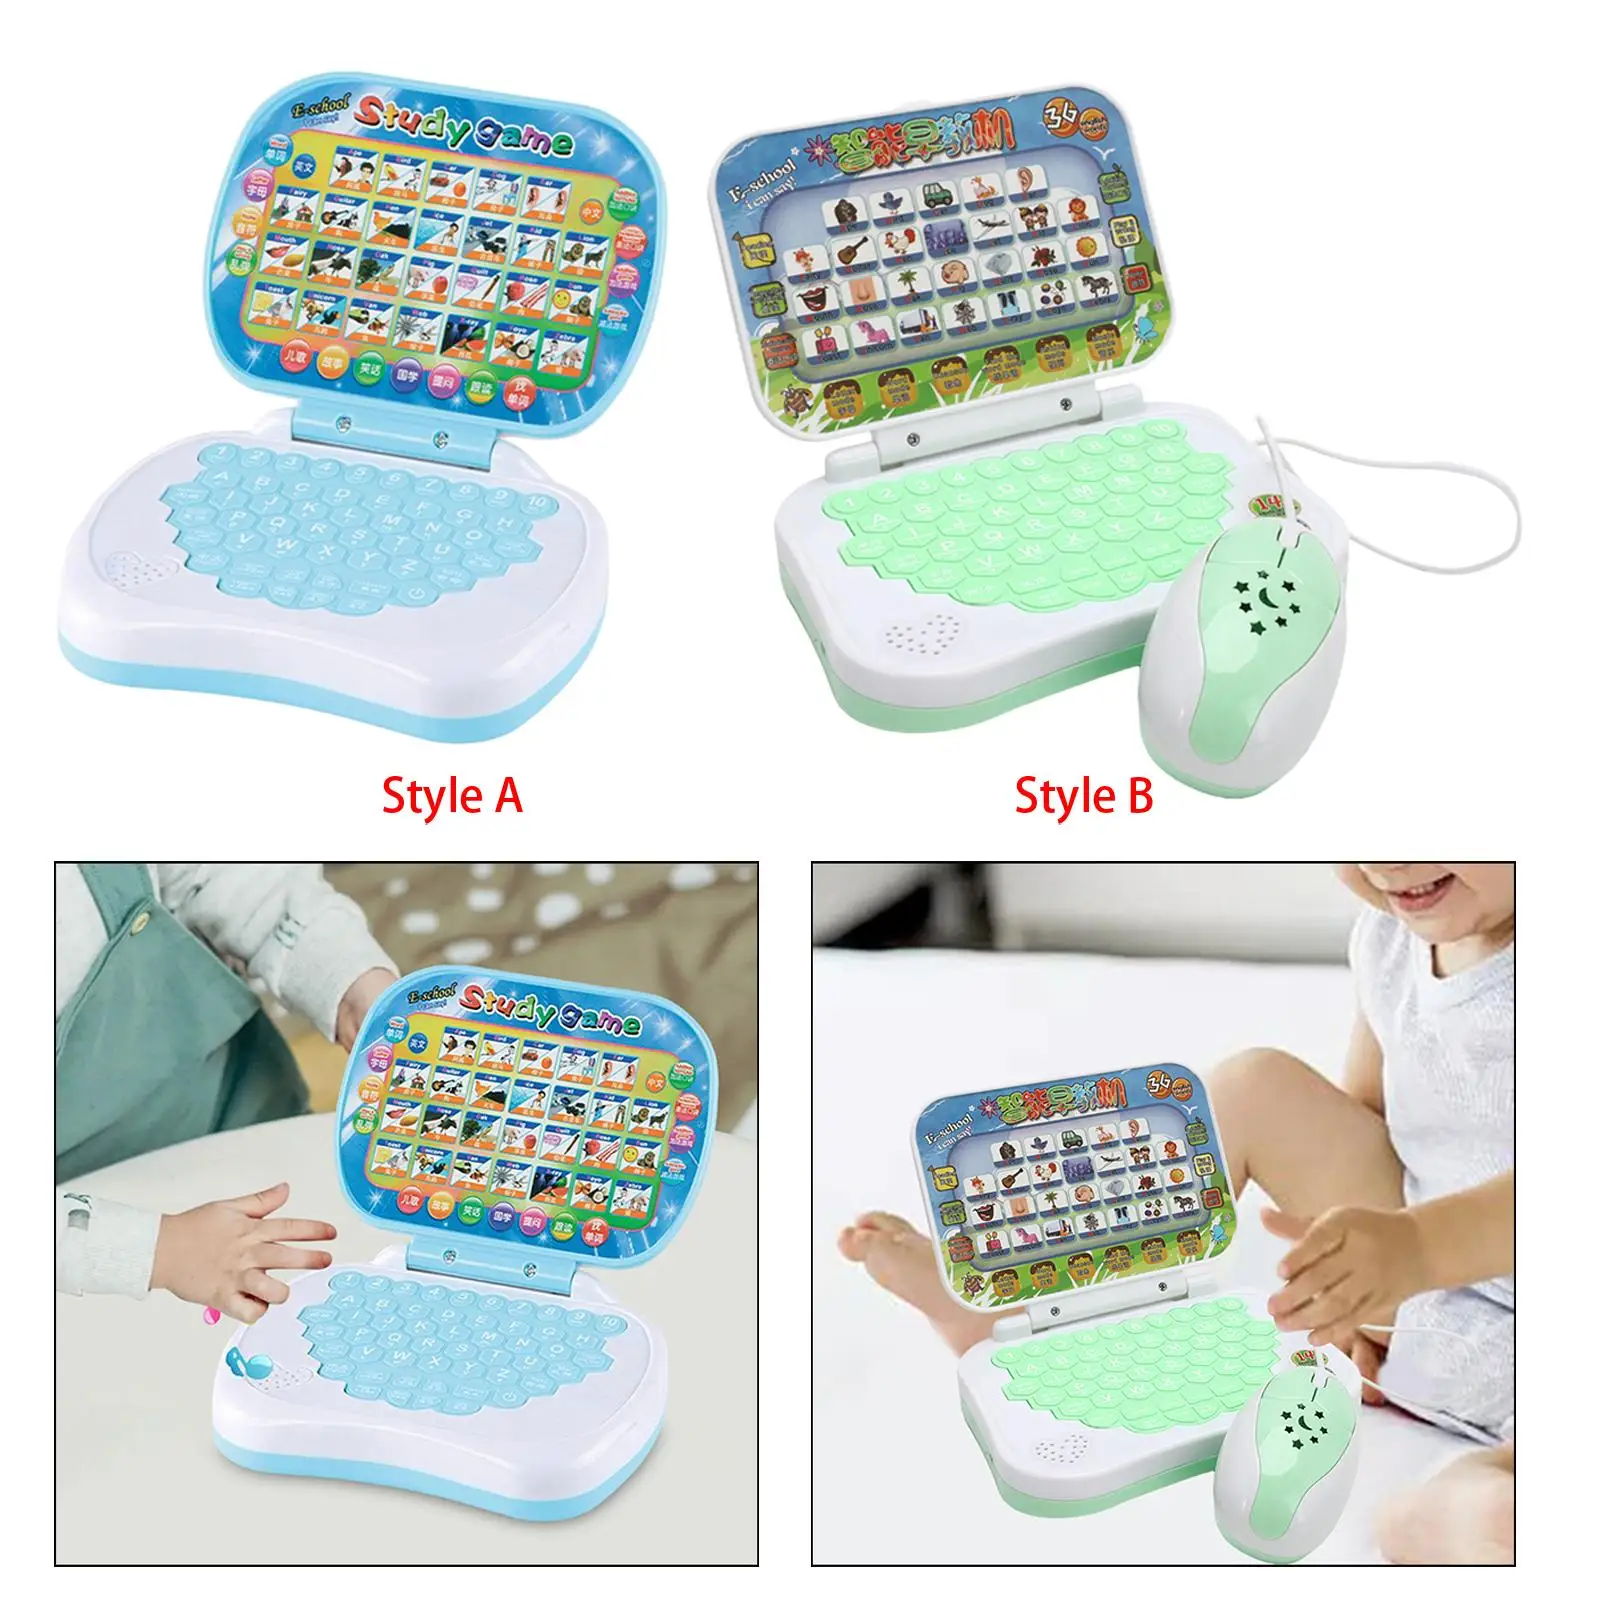 Multifunction Learning Machine Early Education English Early Education Toy Activities Kids Laptop Toy for Toddler Kids